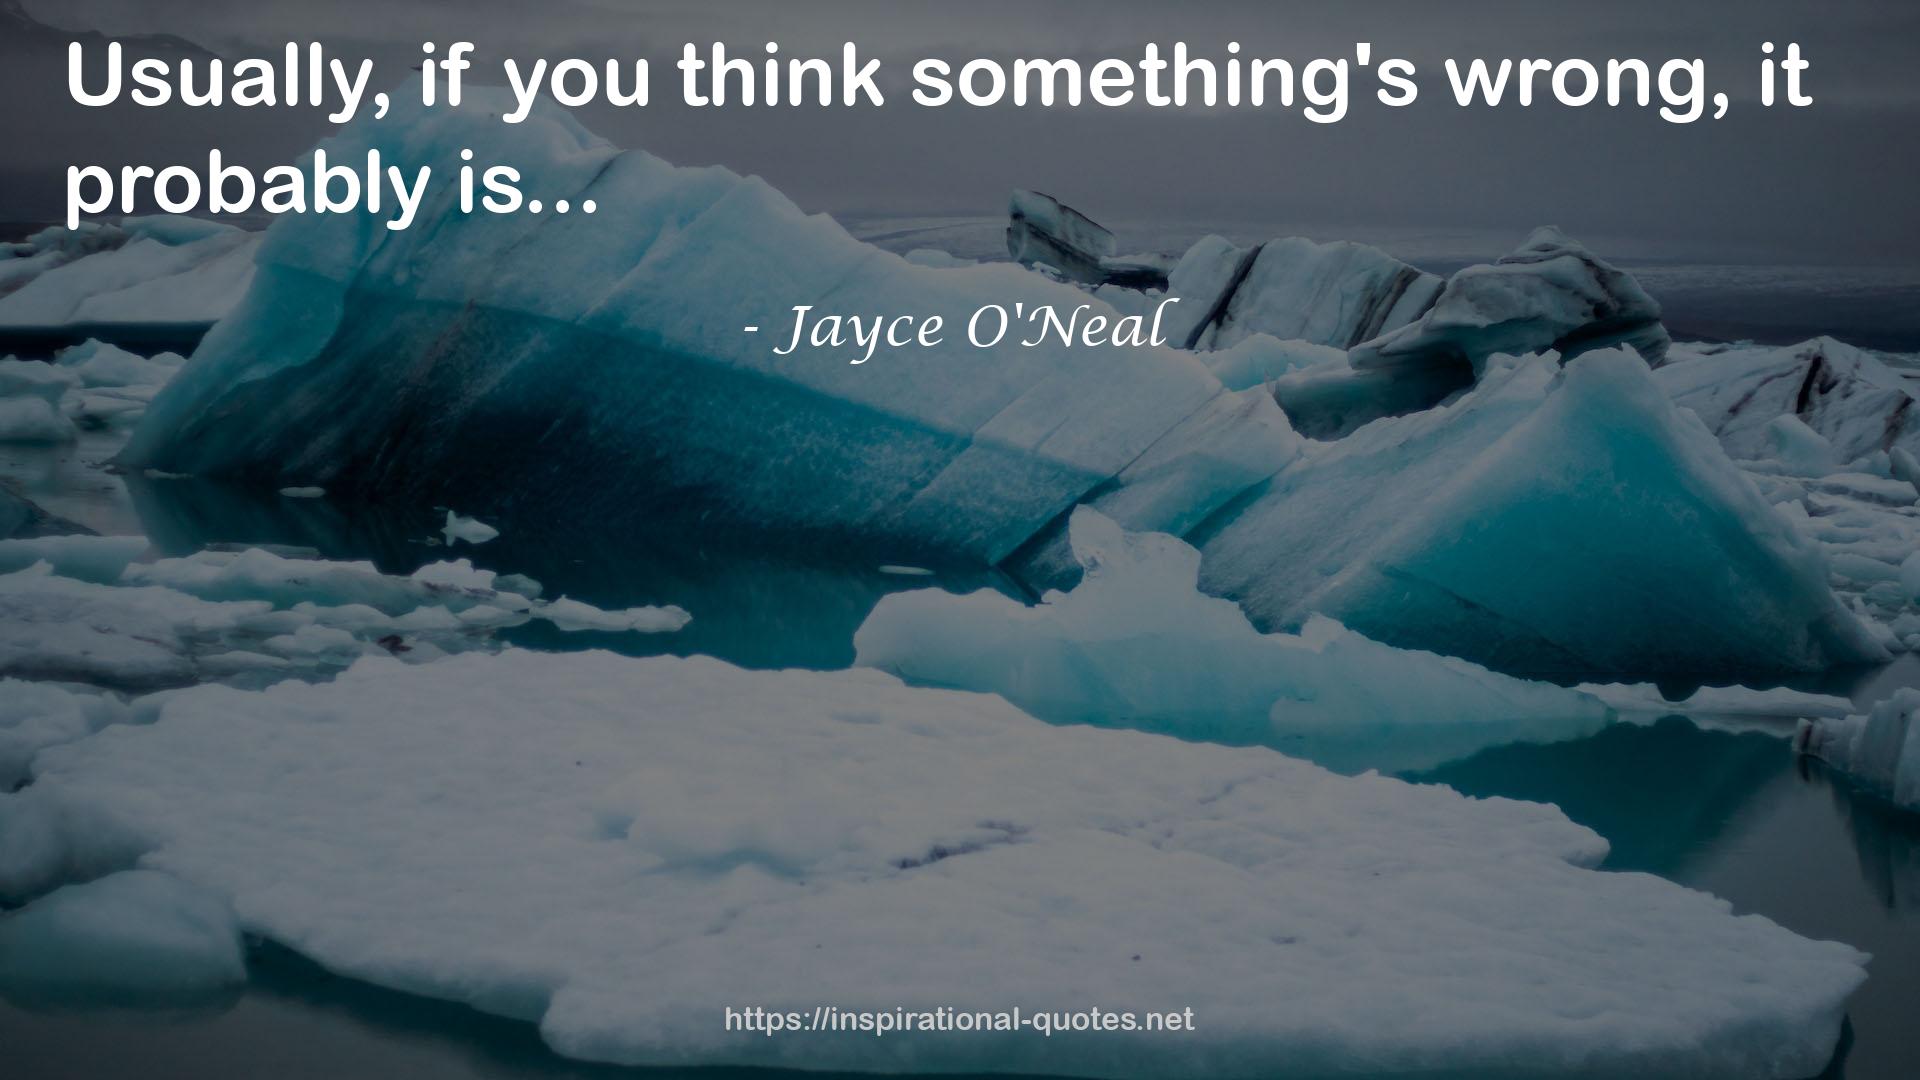 Jayce O'Neal QUOTES